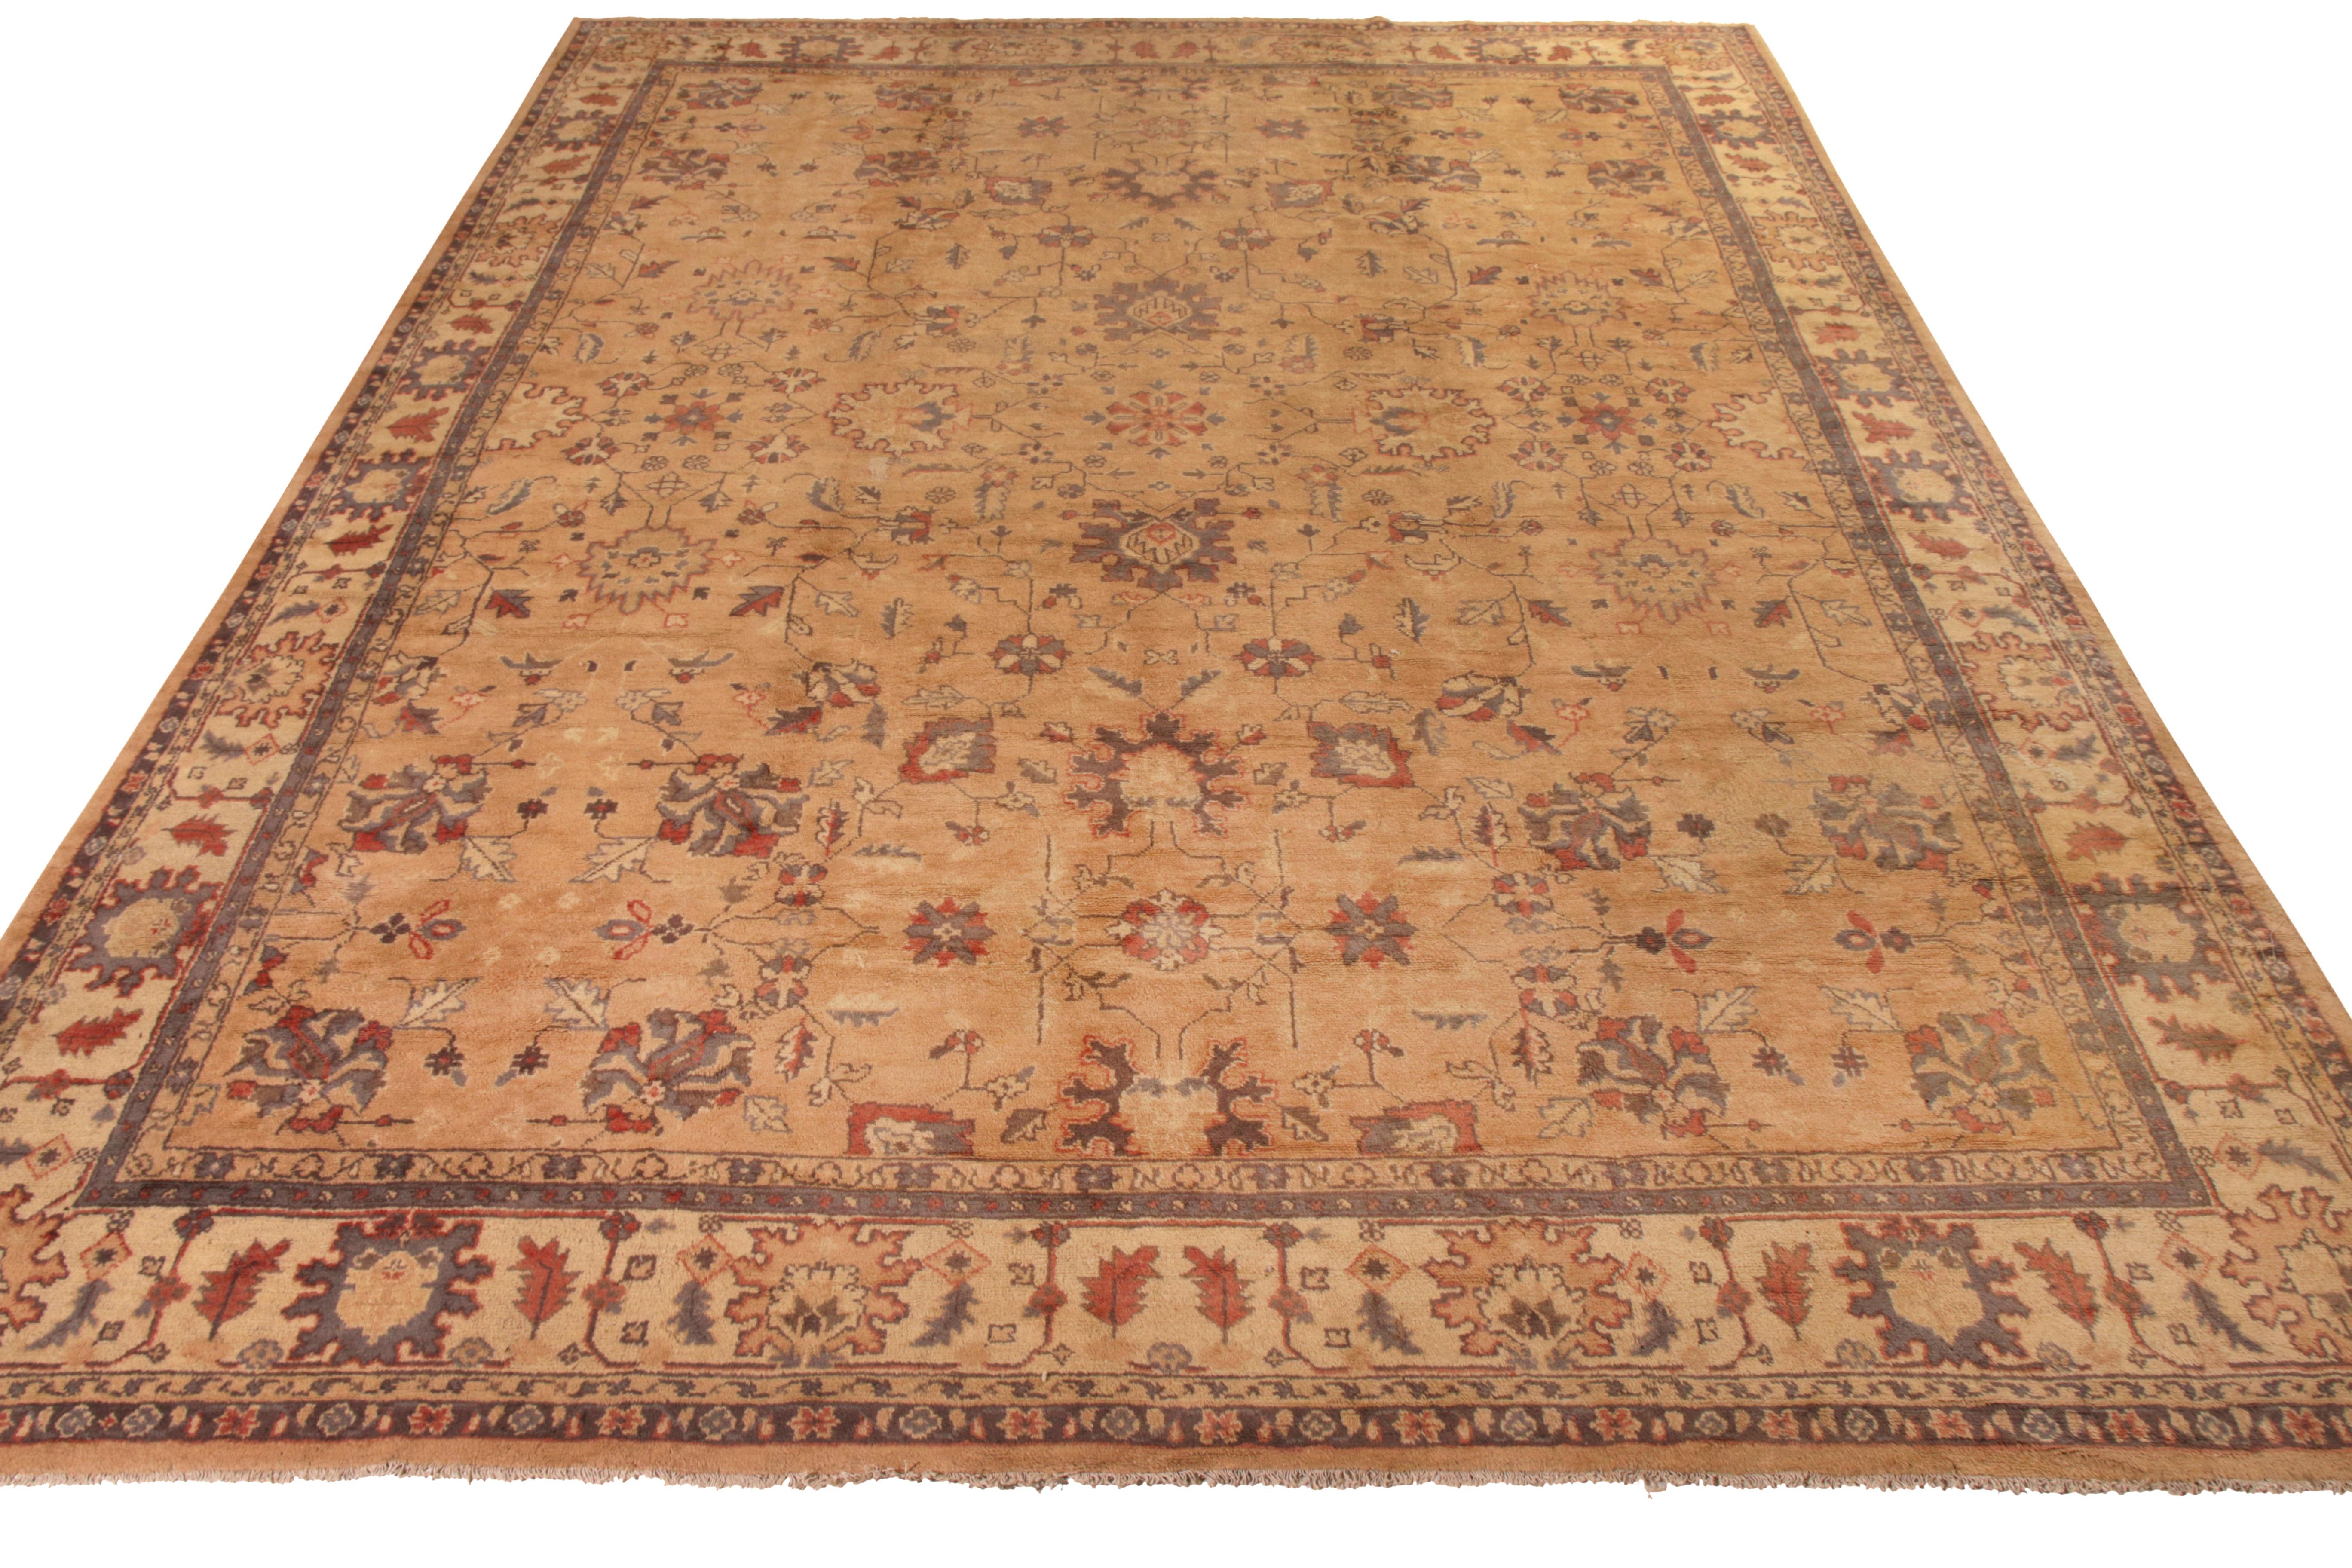 A scintillating antique 12 x 15 Agra rug in hand-knotted wool, joining Rug & Kilim’s Antique & Vintage Collection. A specimen of mesmerising artistic sensibilities hailing from one of the finest Indian workshops circa 1920-1930, this antique Agra